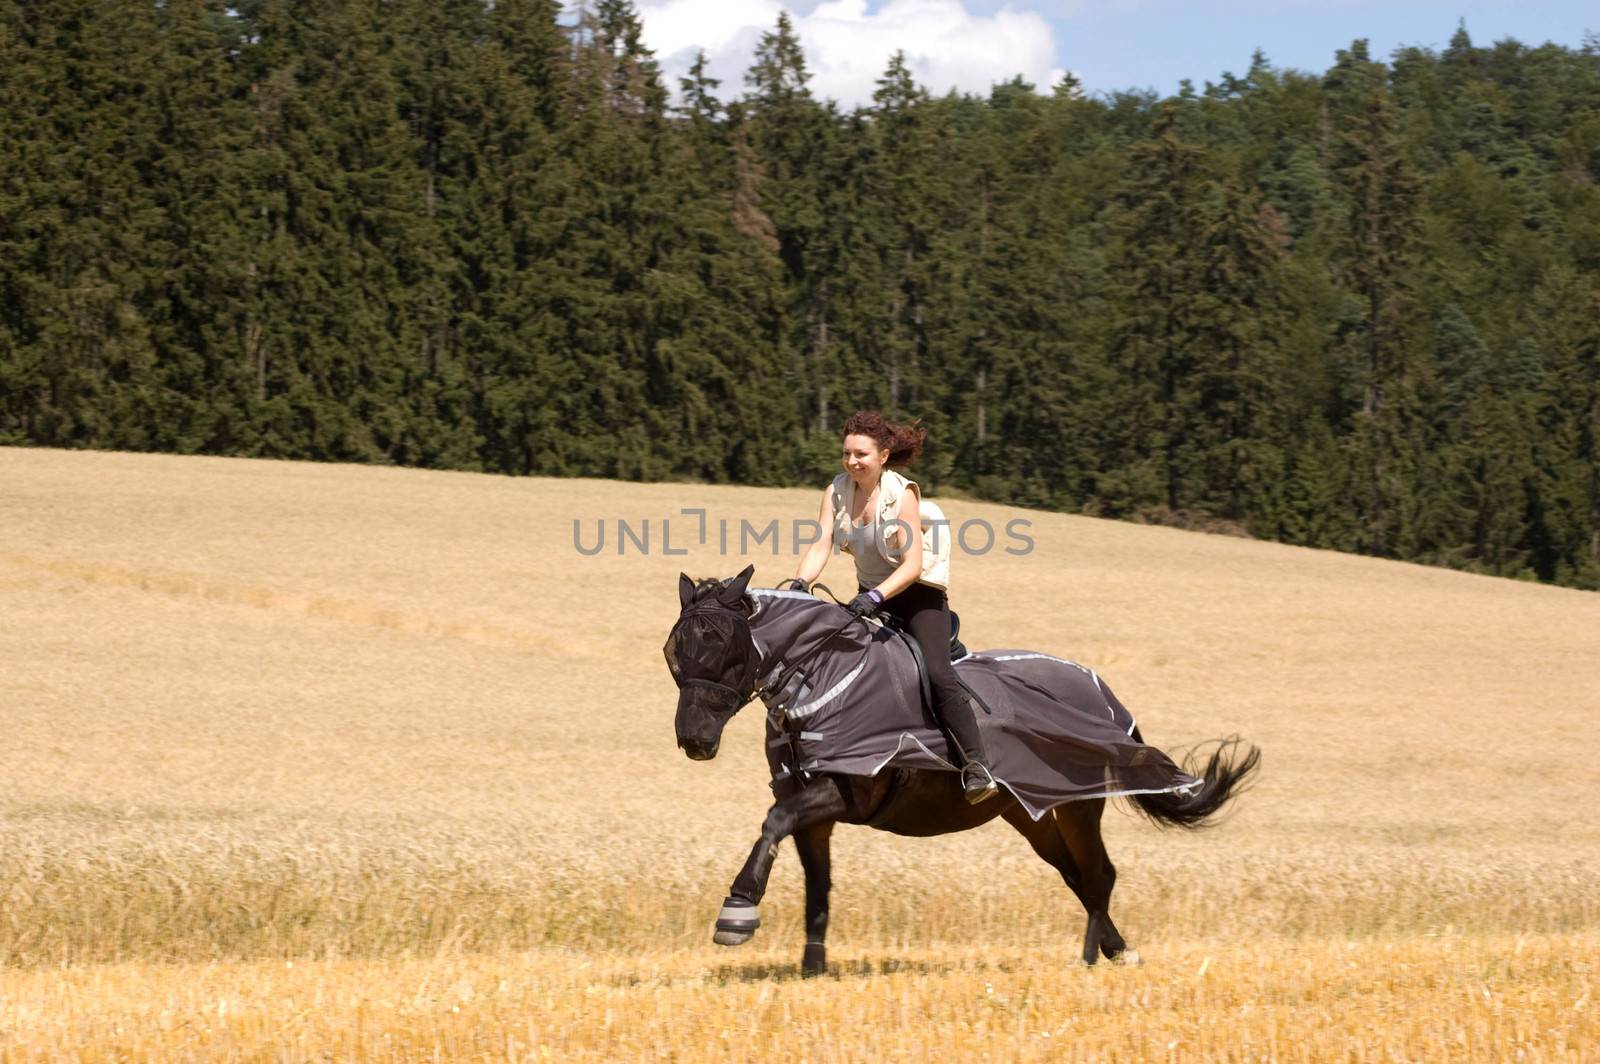 Horseback rides on the field. The horse is protected from insects with blanket-net.